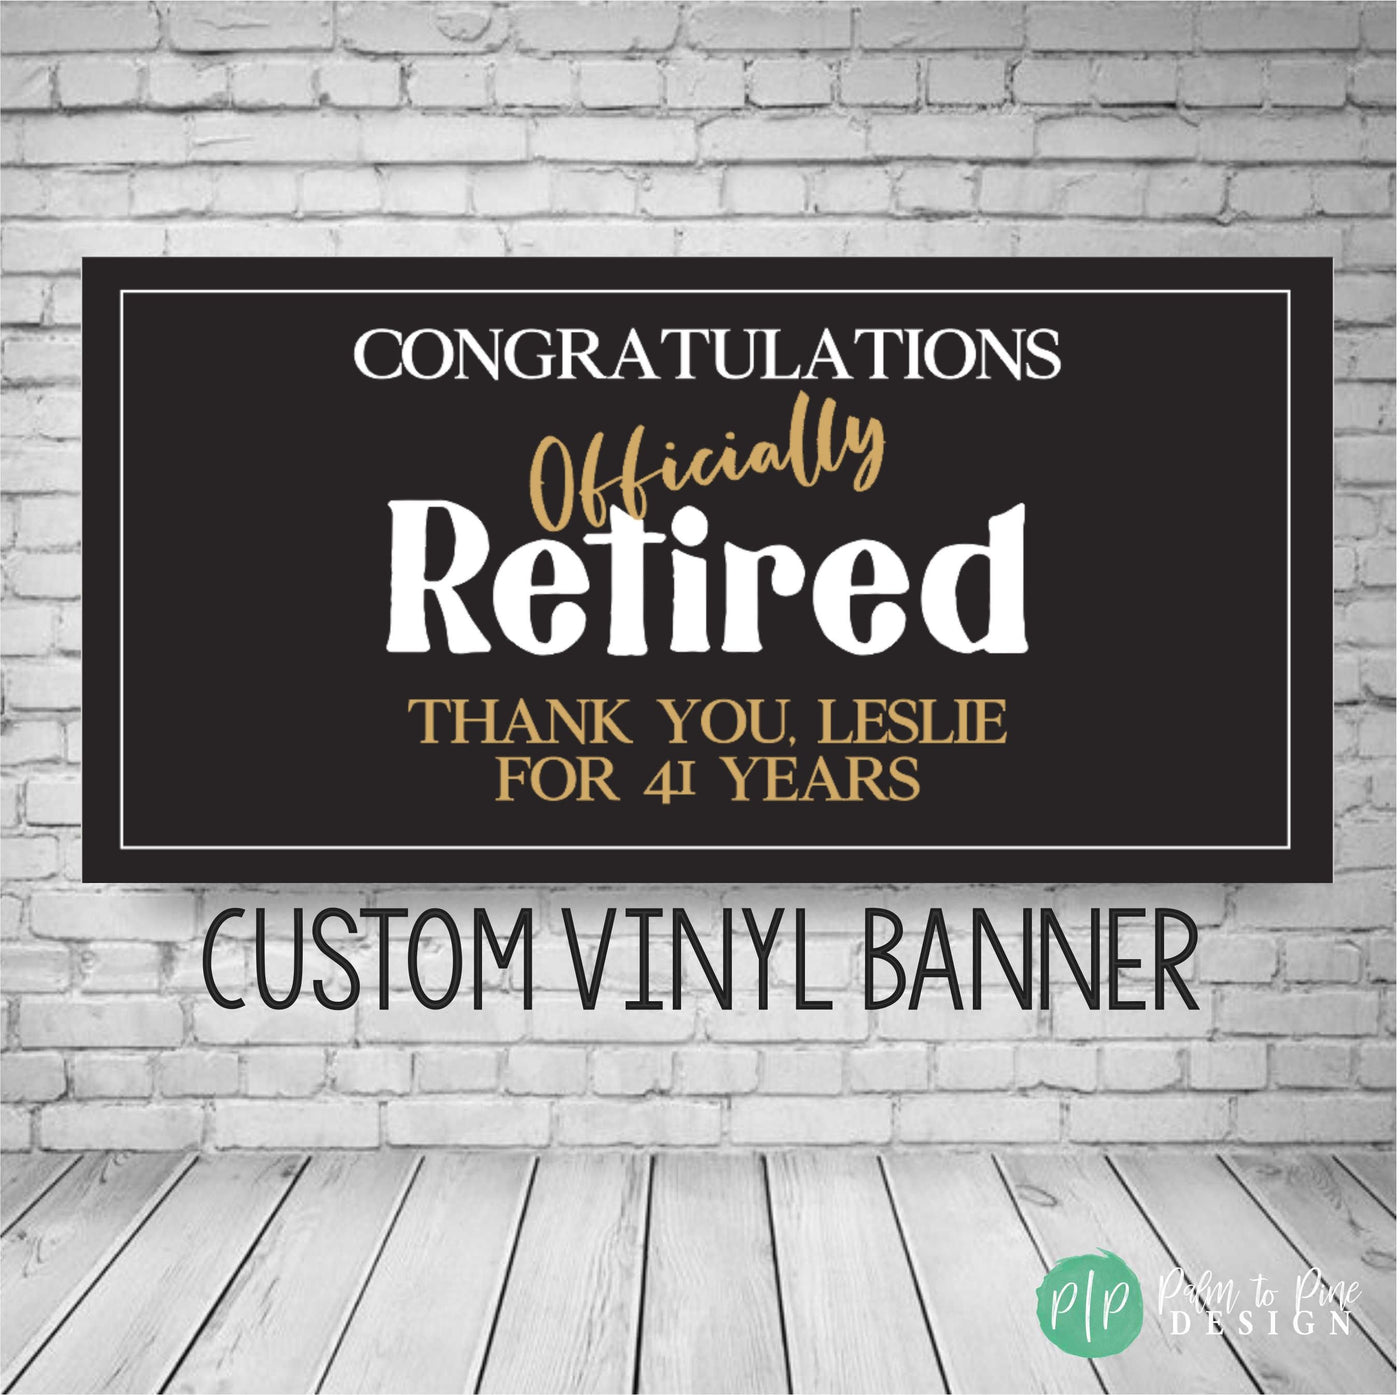 Retirement Banner, Retirement Sign, Retirement Celebration Banner, Retirement Party Decoration, Retirement Party Backdrop,Officially Retired